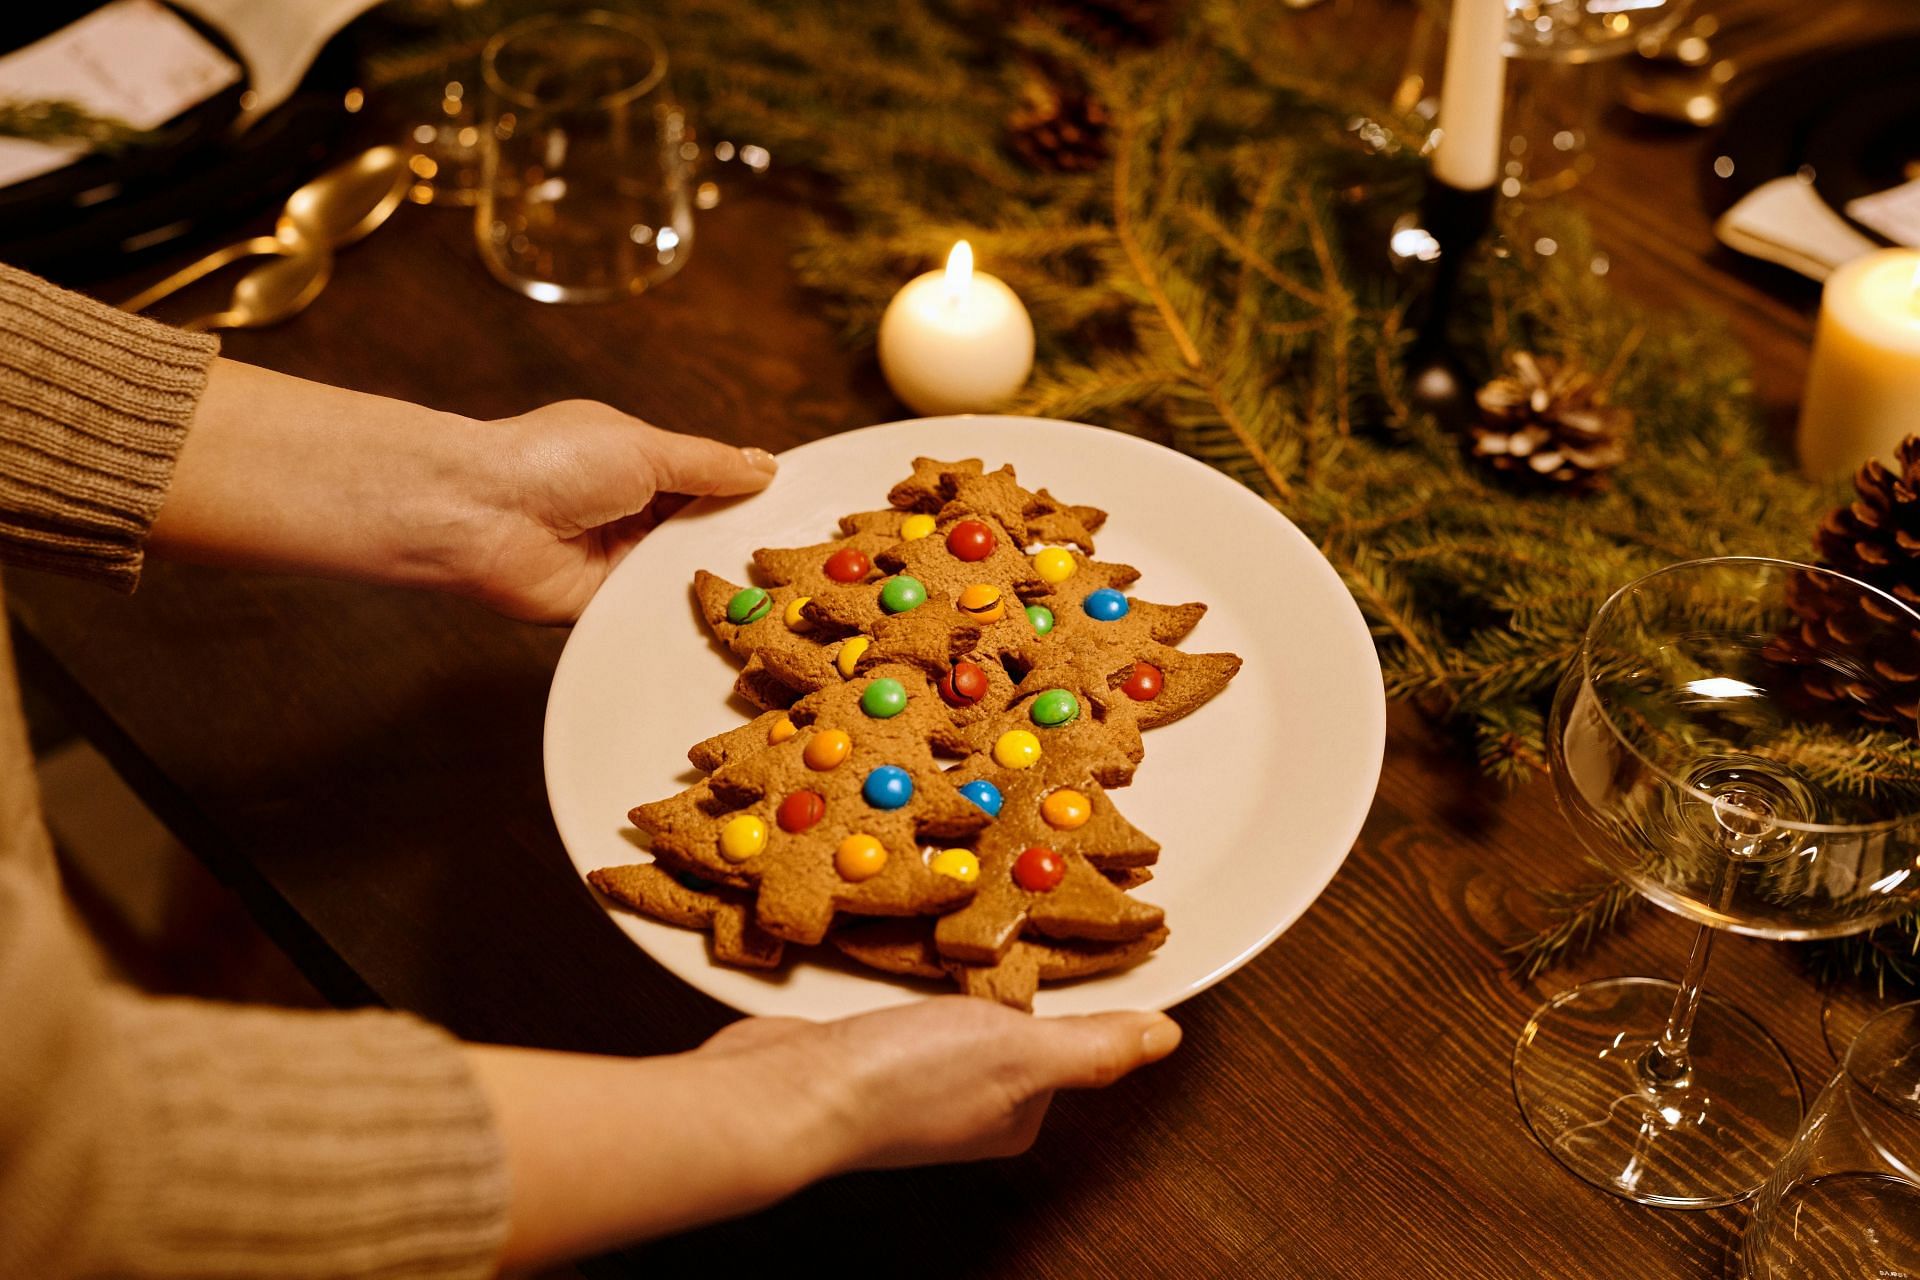 Girl Scout Cookies (image sourced via Pexels / Photo by nicole)